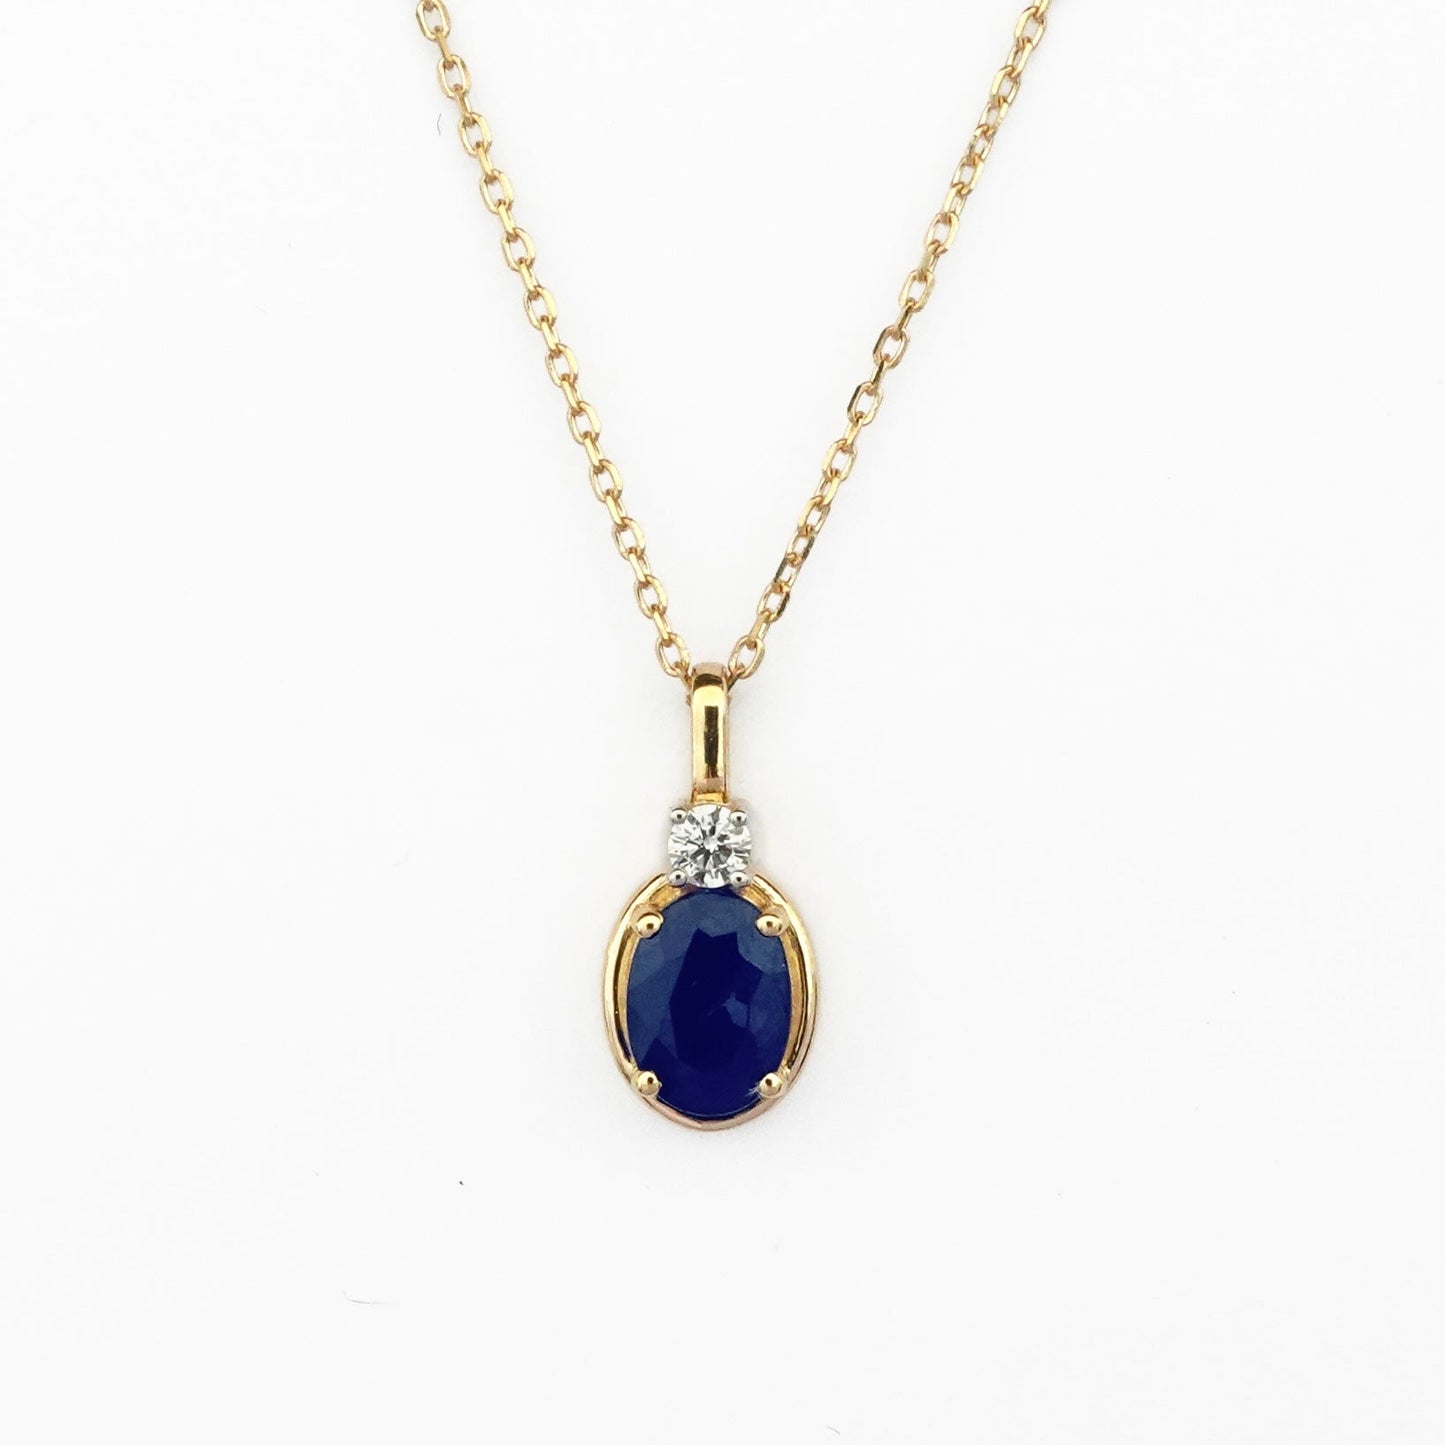 Larisa Necklace in Diamond and Sapphire - 18k Gold - Lynor